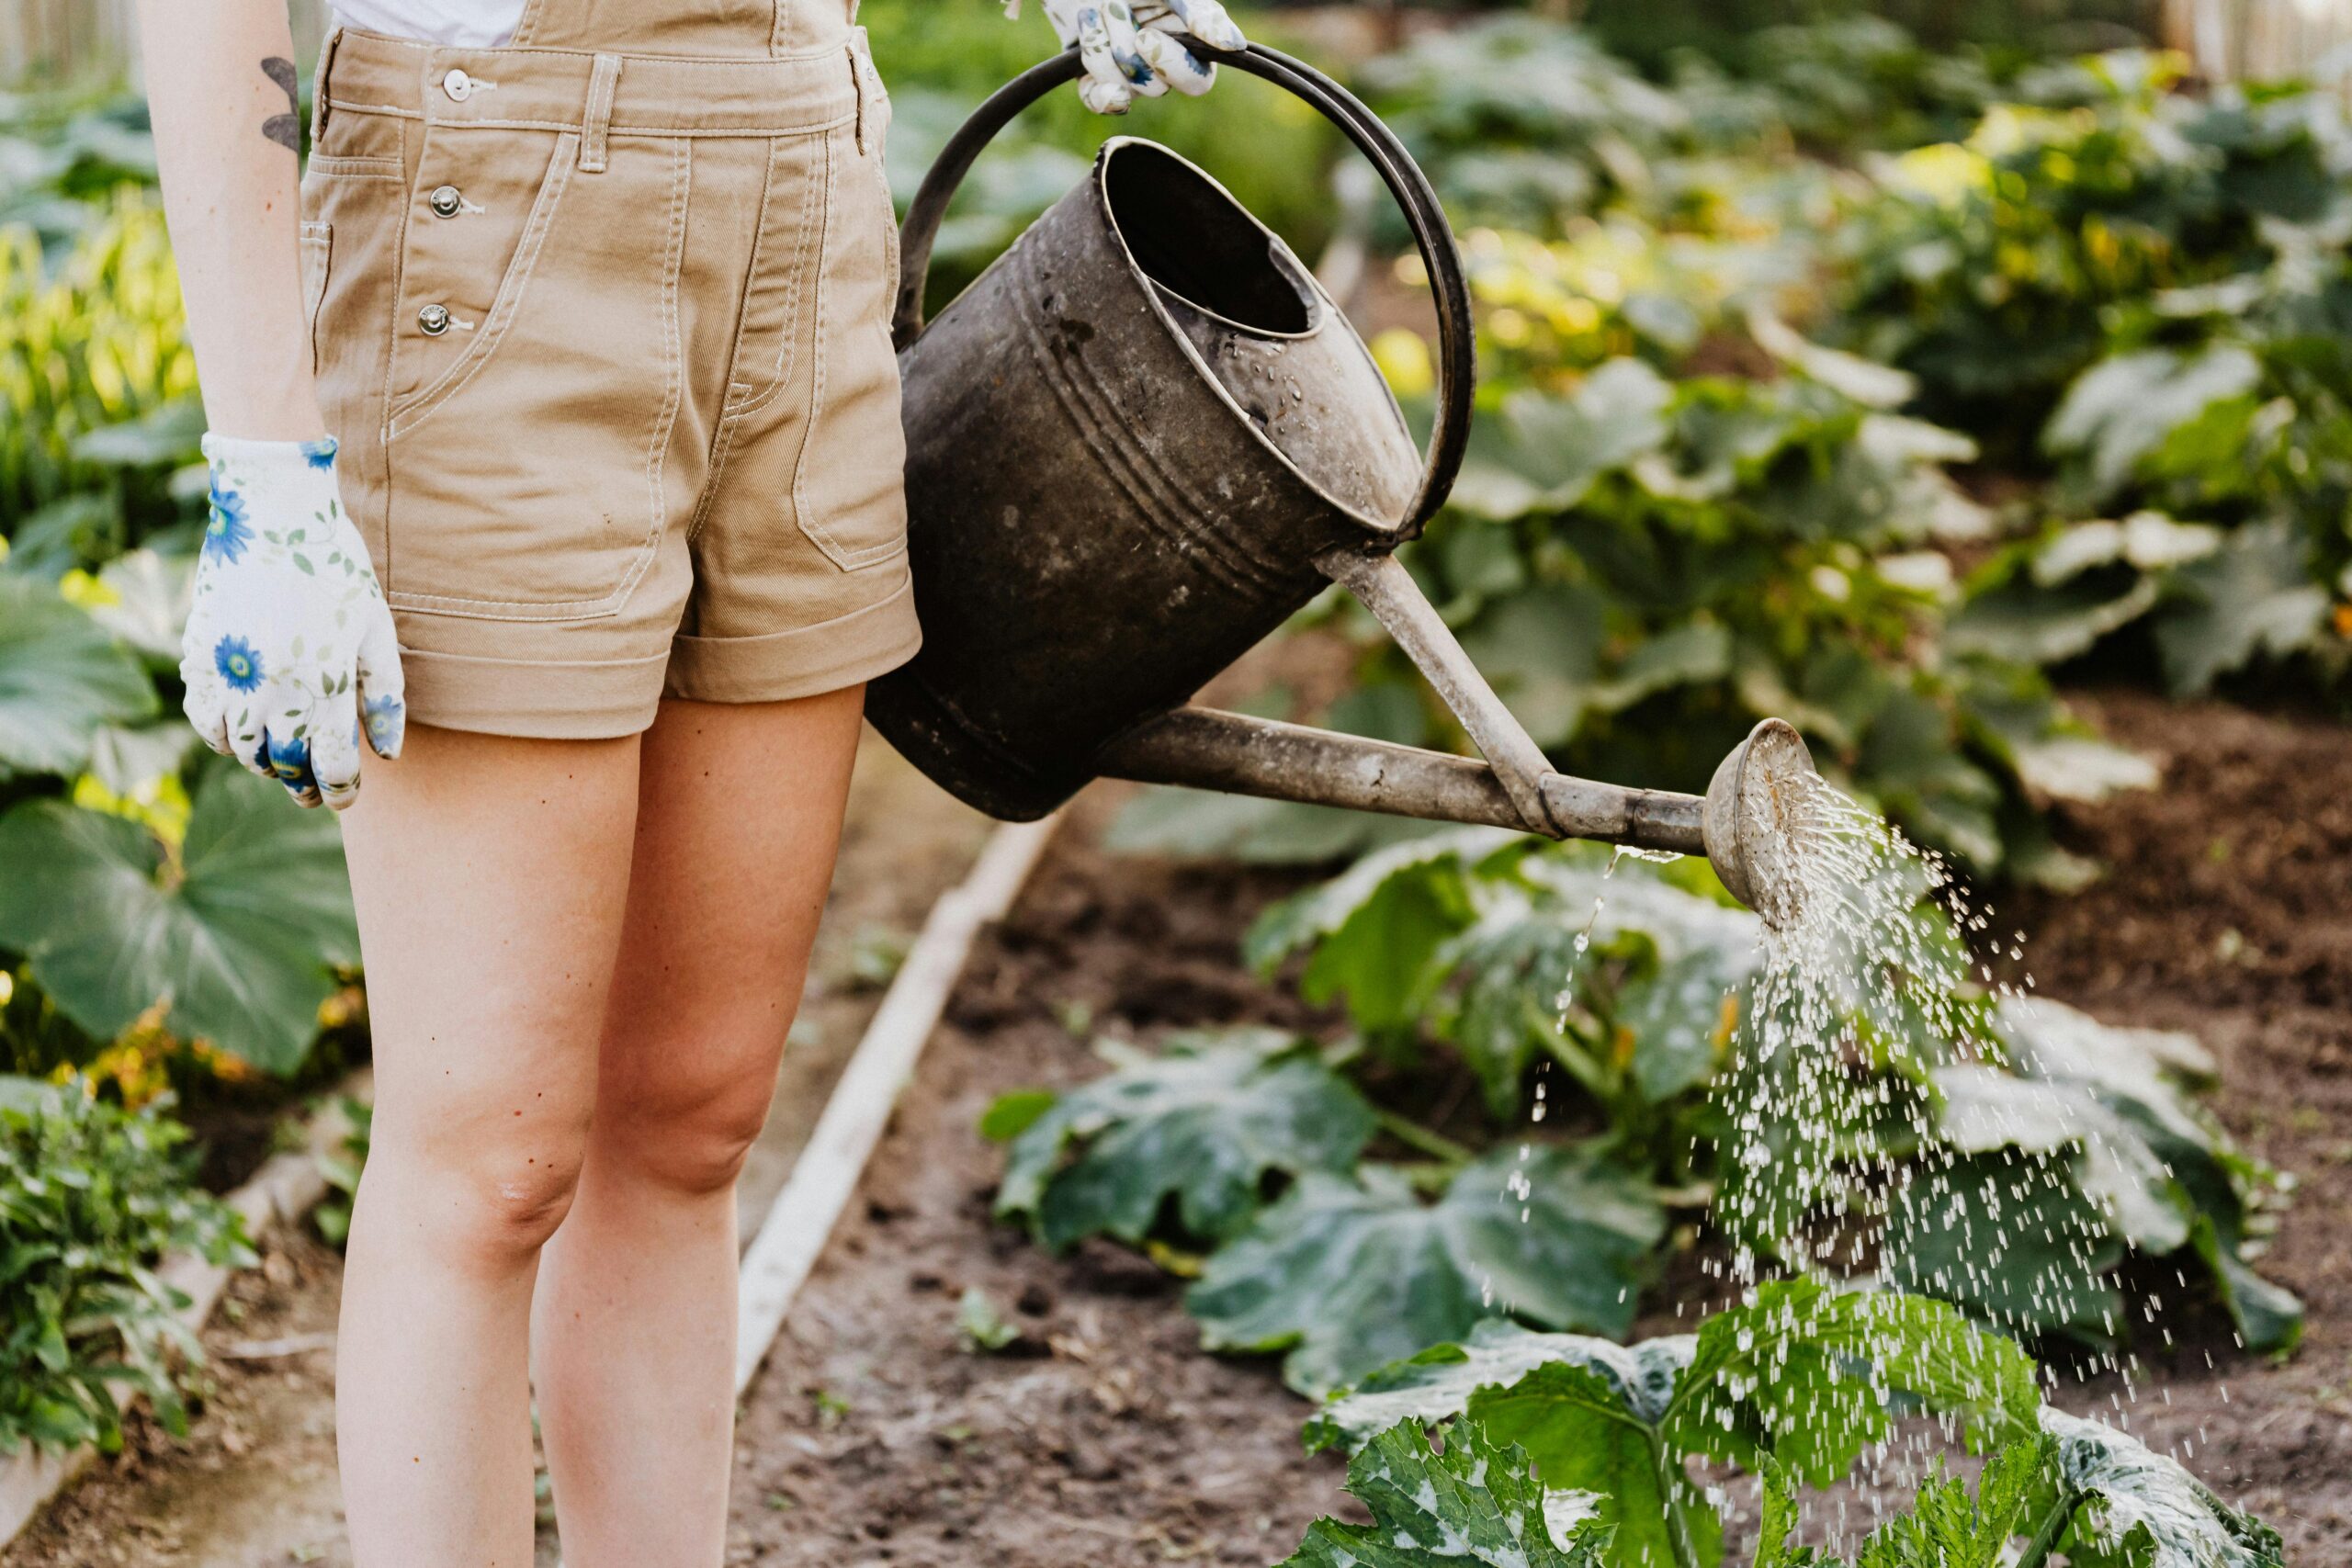 Photo by Karolina Kaboompics: https://www.pexels.com/photo/person-in-brown-shorts-watering-the-plants-4750270/